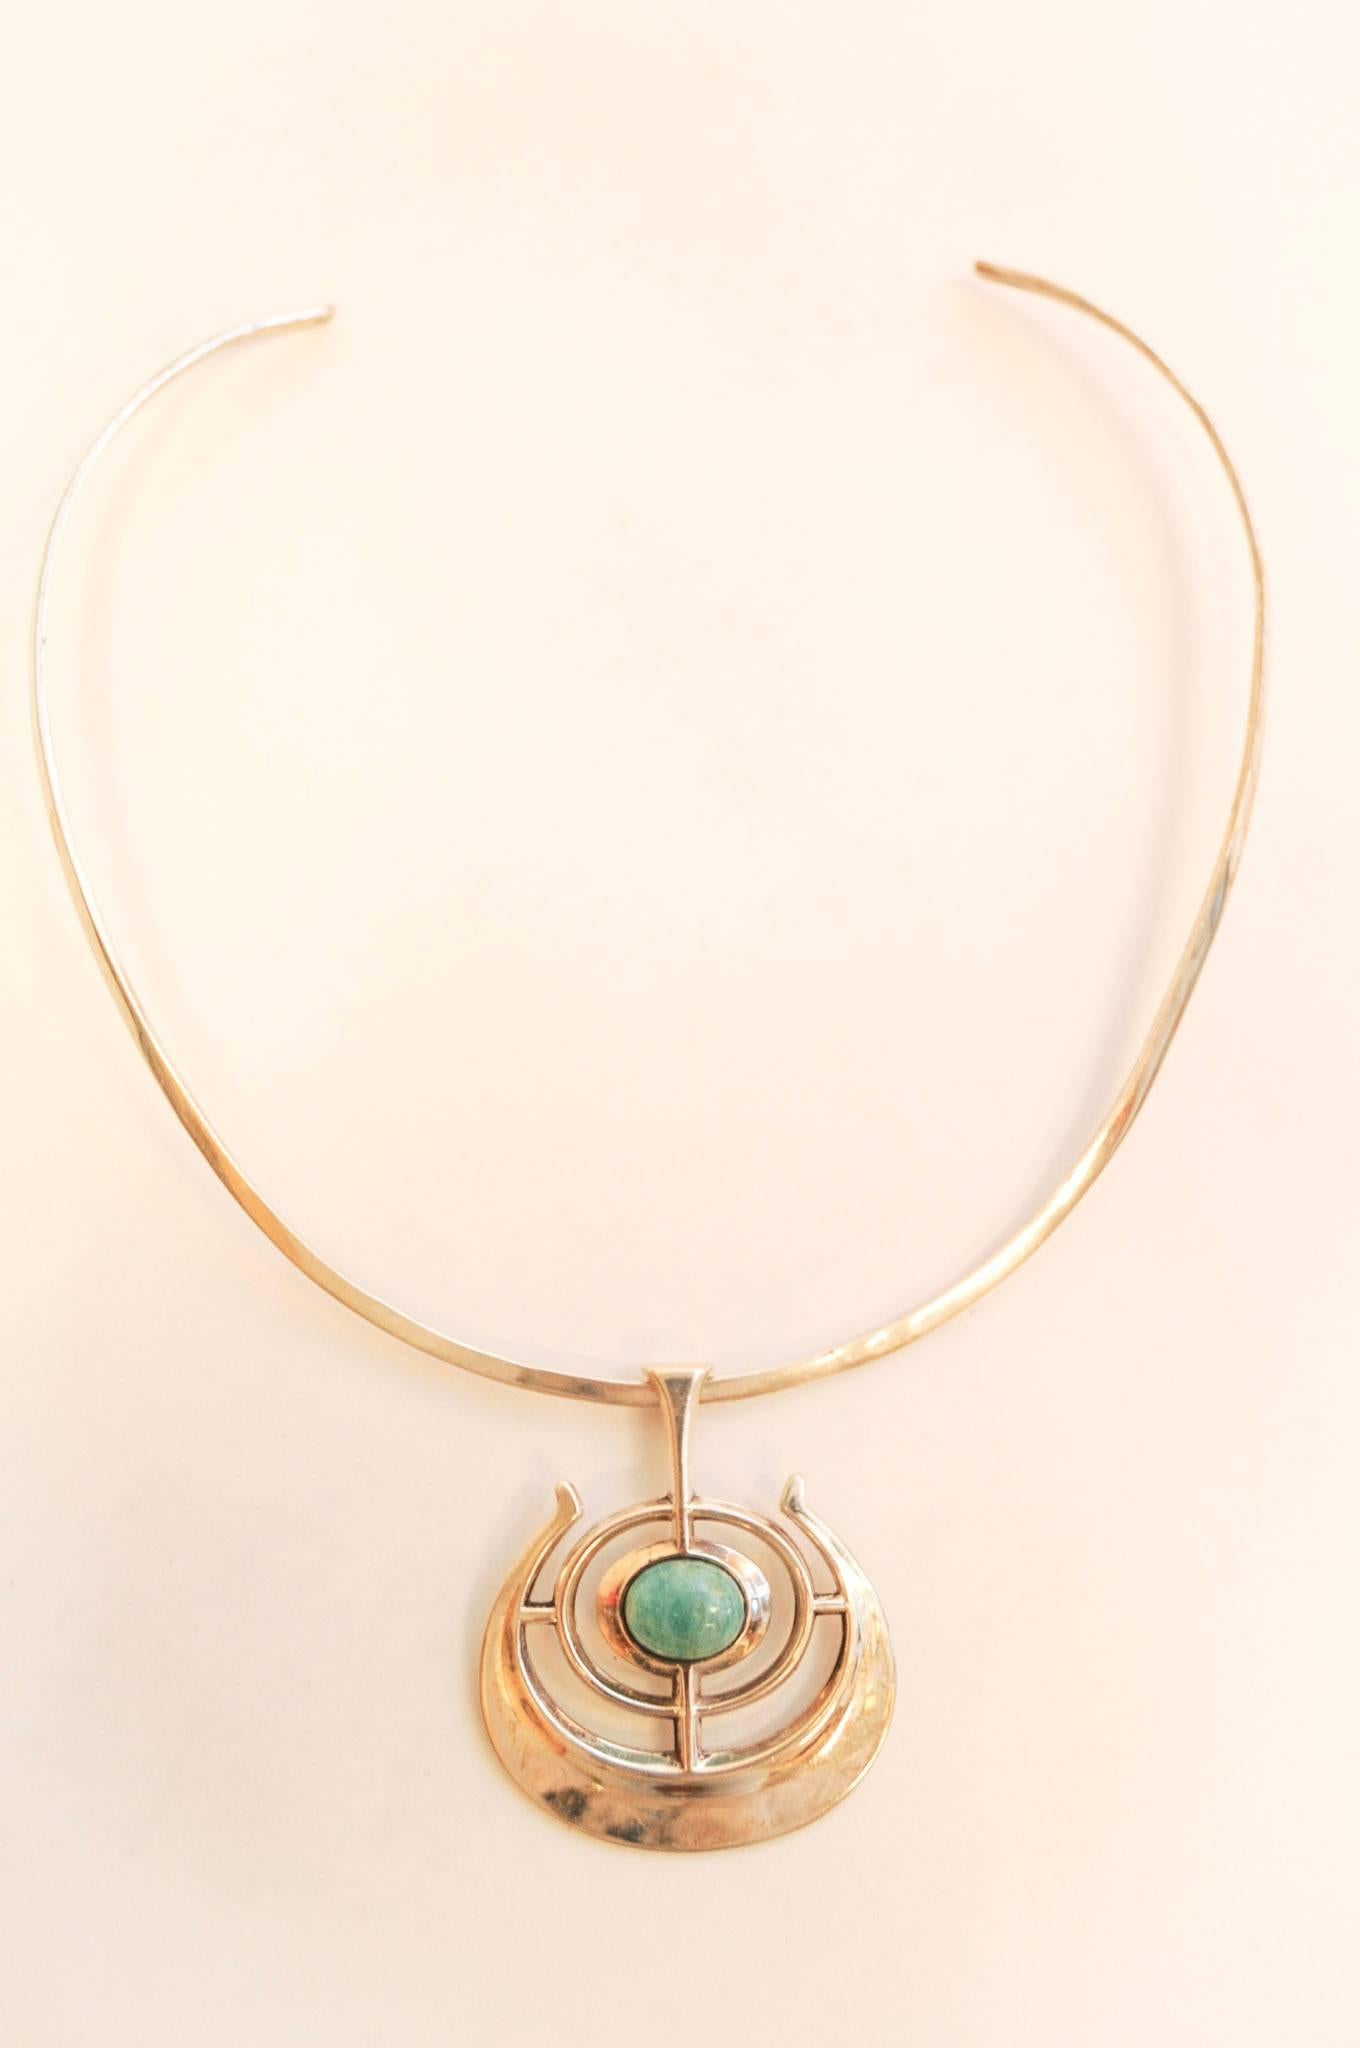 Ship of good Fortune, designer Bjørn Sigurd Østern, Produced by David Andersen. Sterling Silver Pendant with Amazonite stone, 1964. Materials: sterling silver, amazonite from David Andersen`s famous TROLL series. Size: 5.3 x 4.5cm.  Weight: 23